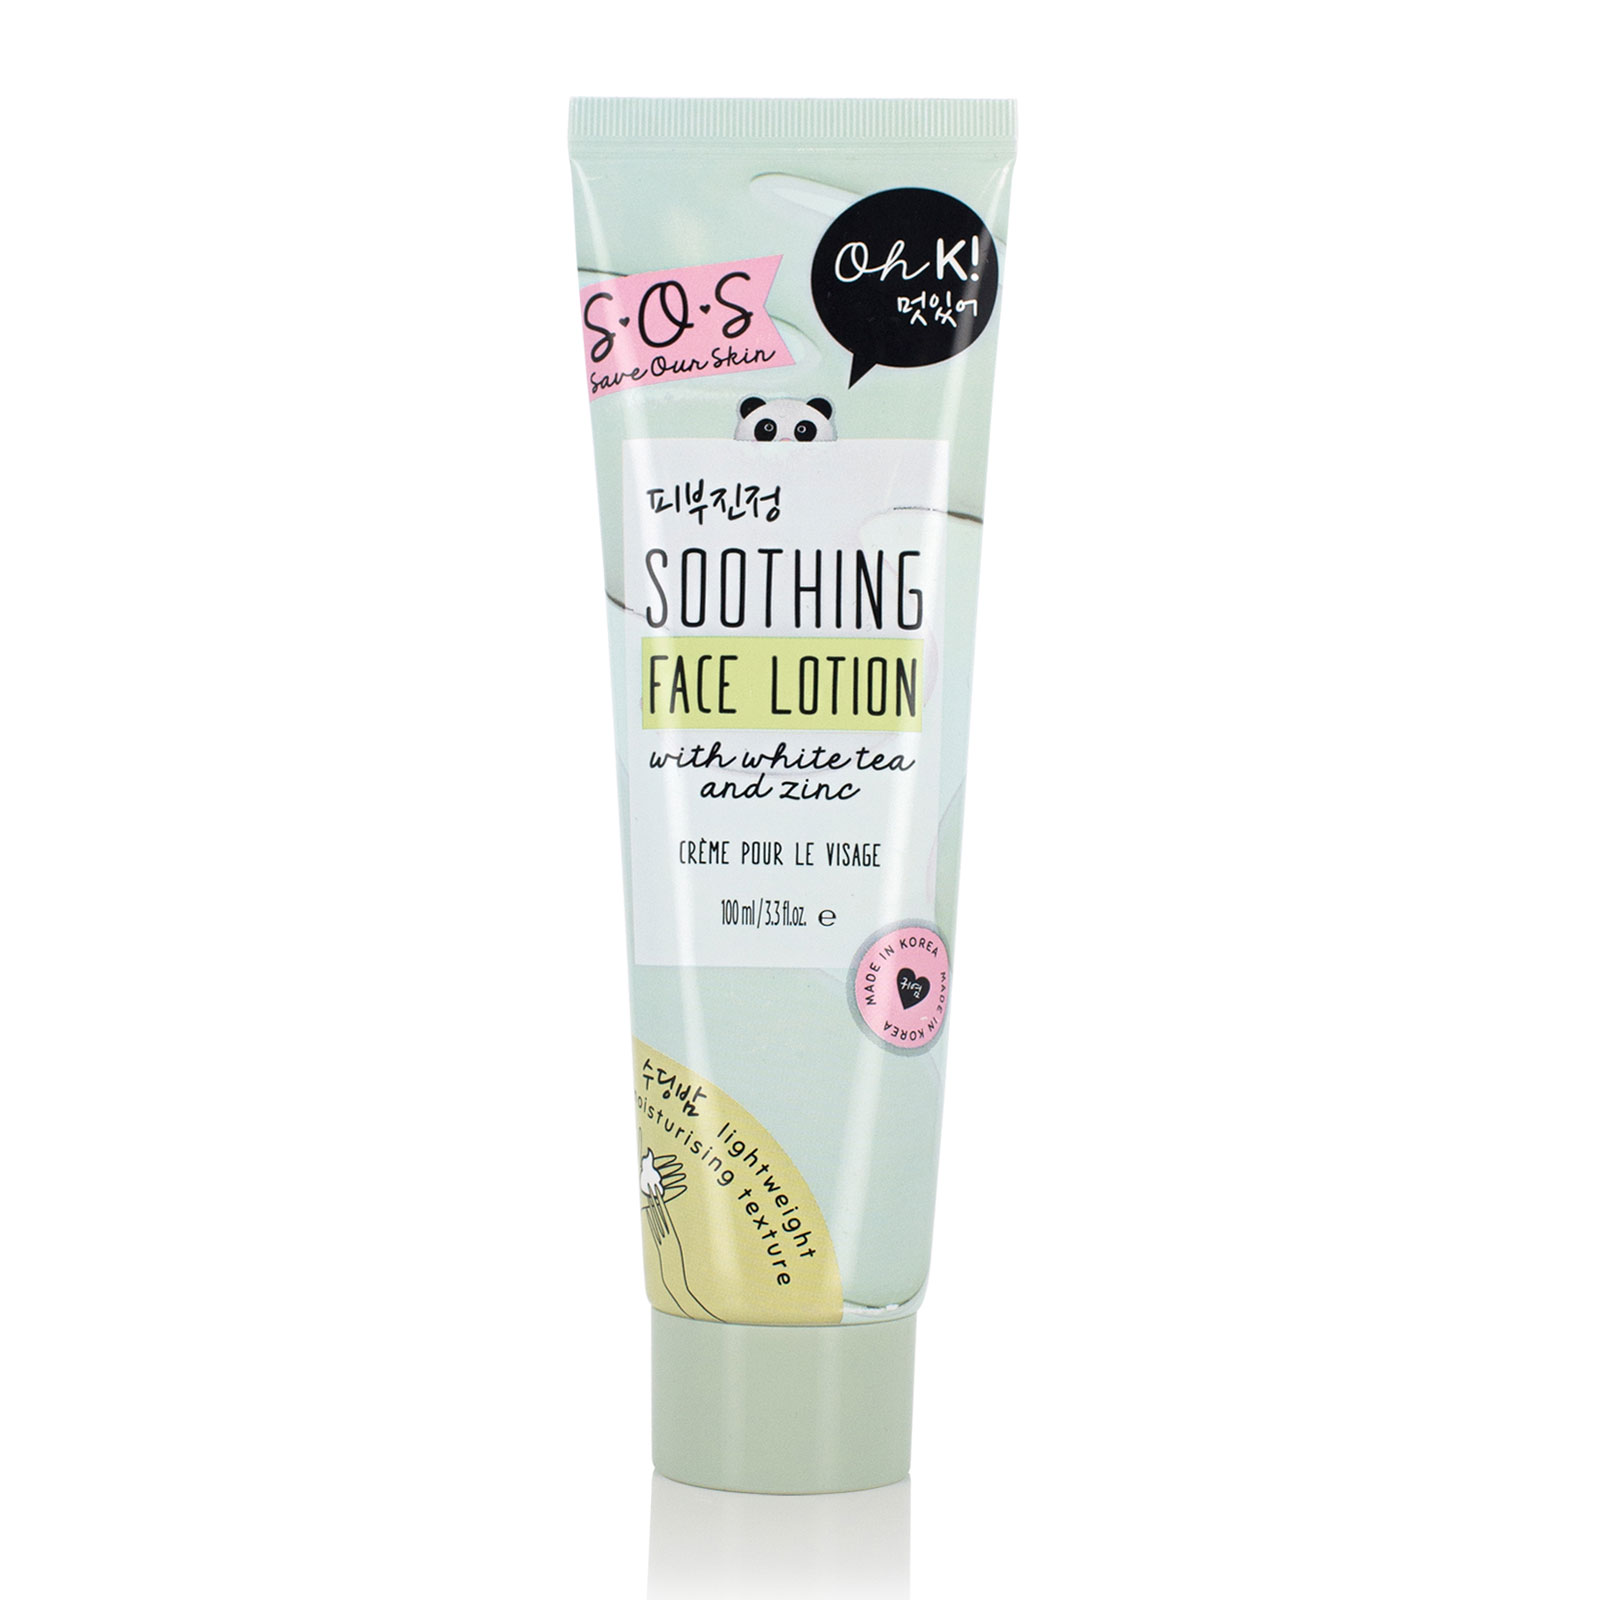 oh k! sos soothing face lotion 100ml